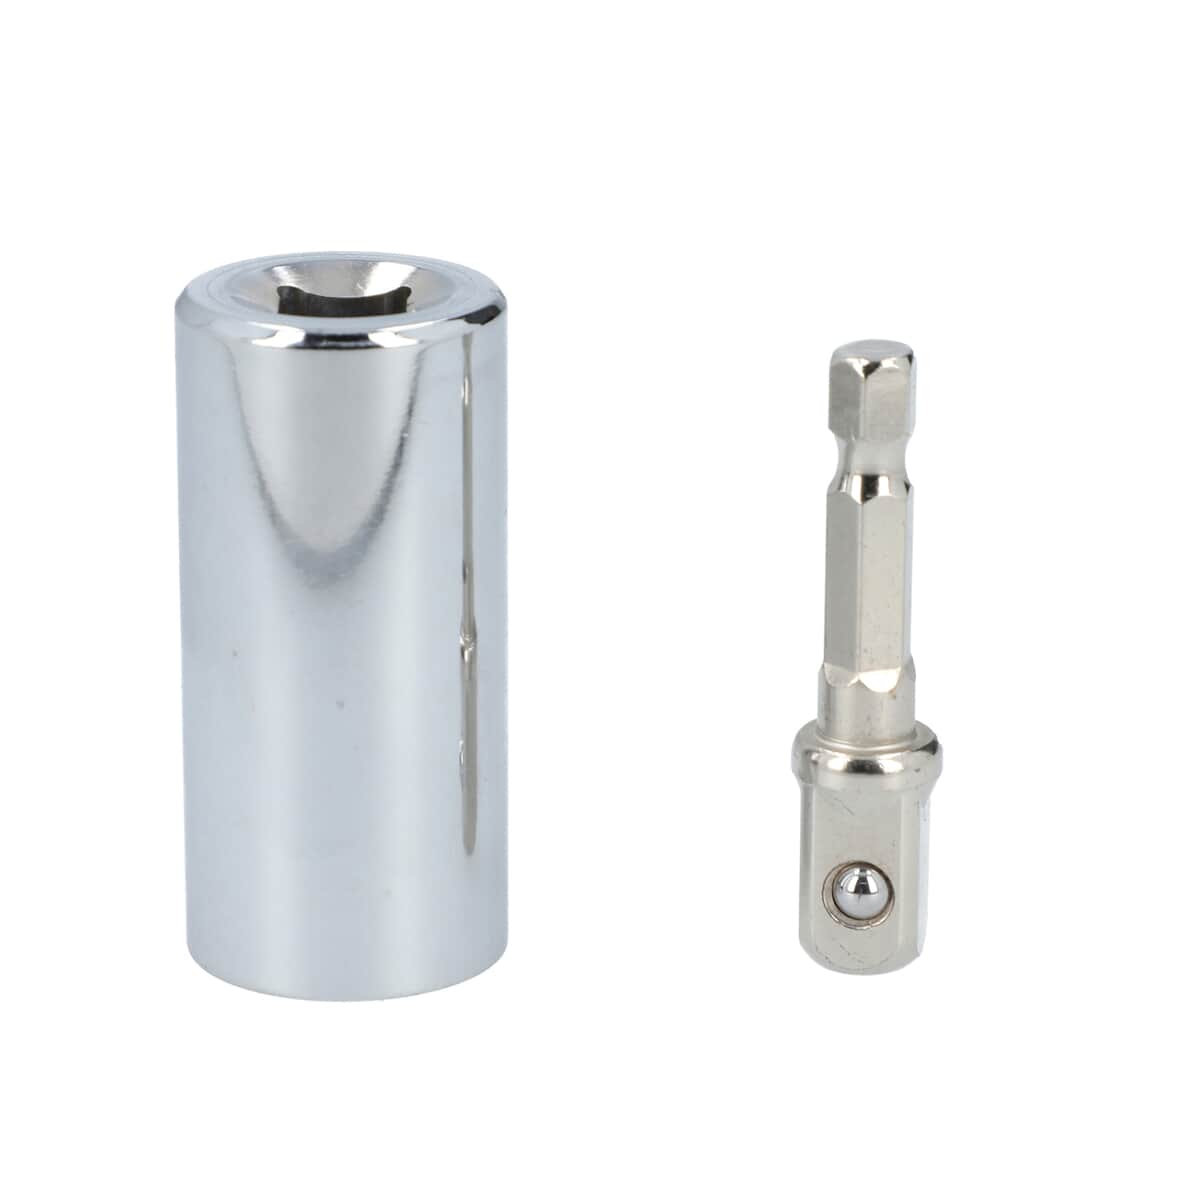 Set of 2 Universal Socket (2.05"x0.98") with Drill Adapter (1.97"x0.39"x0.25") in Stainless Steel - Silver Color image number 0